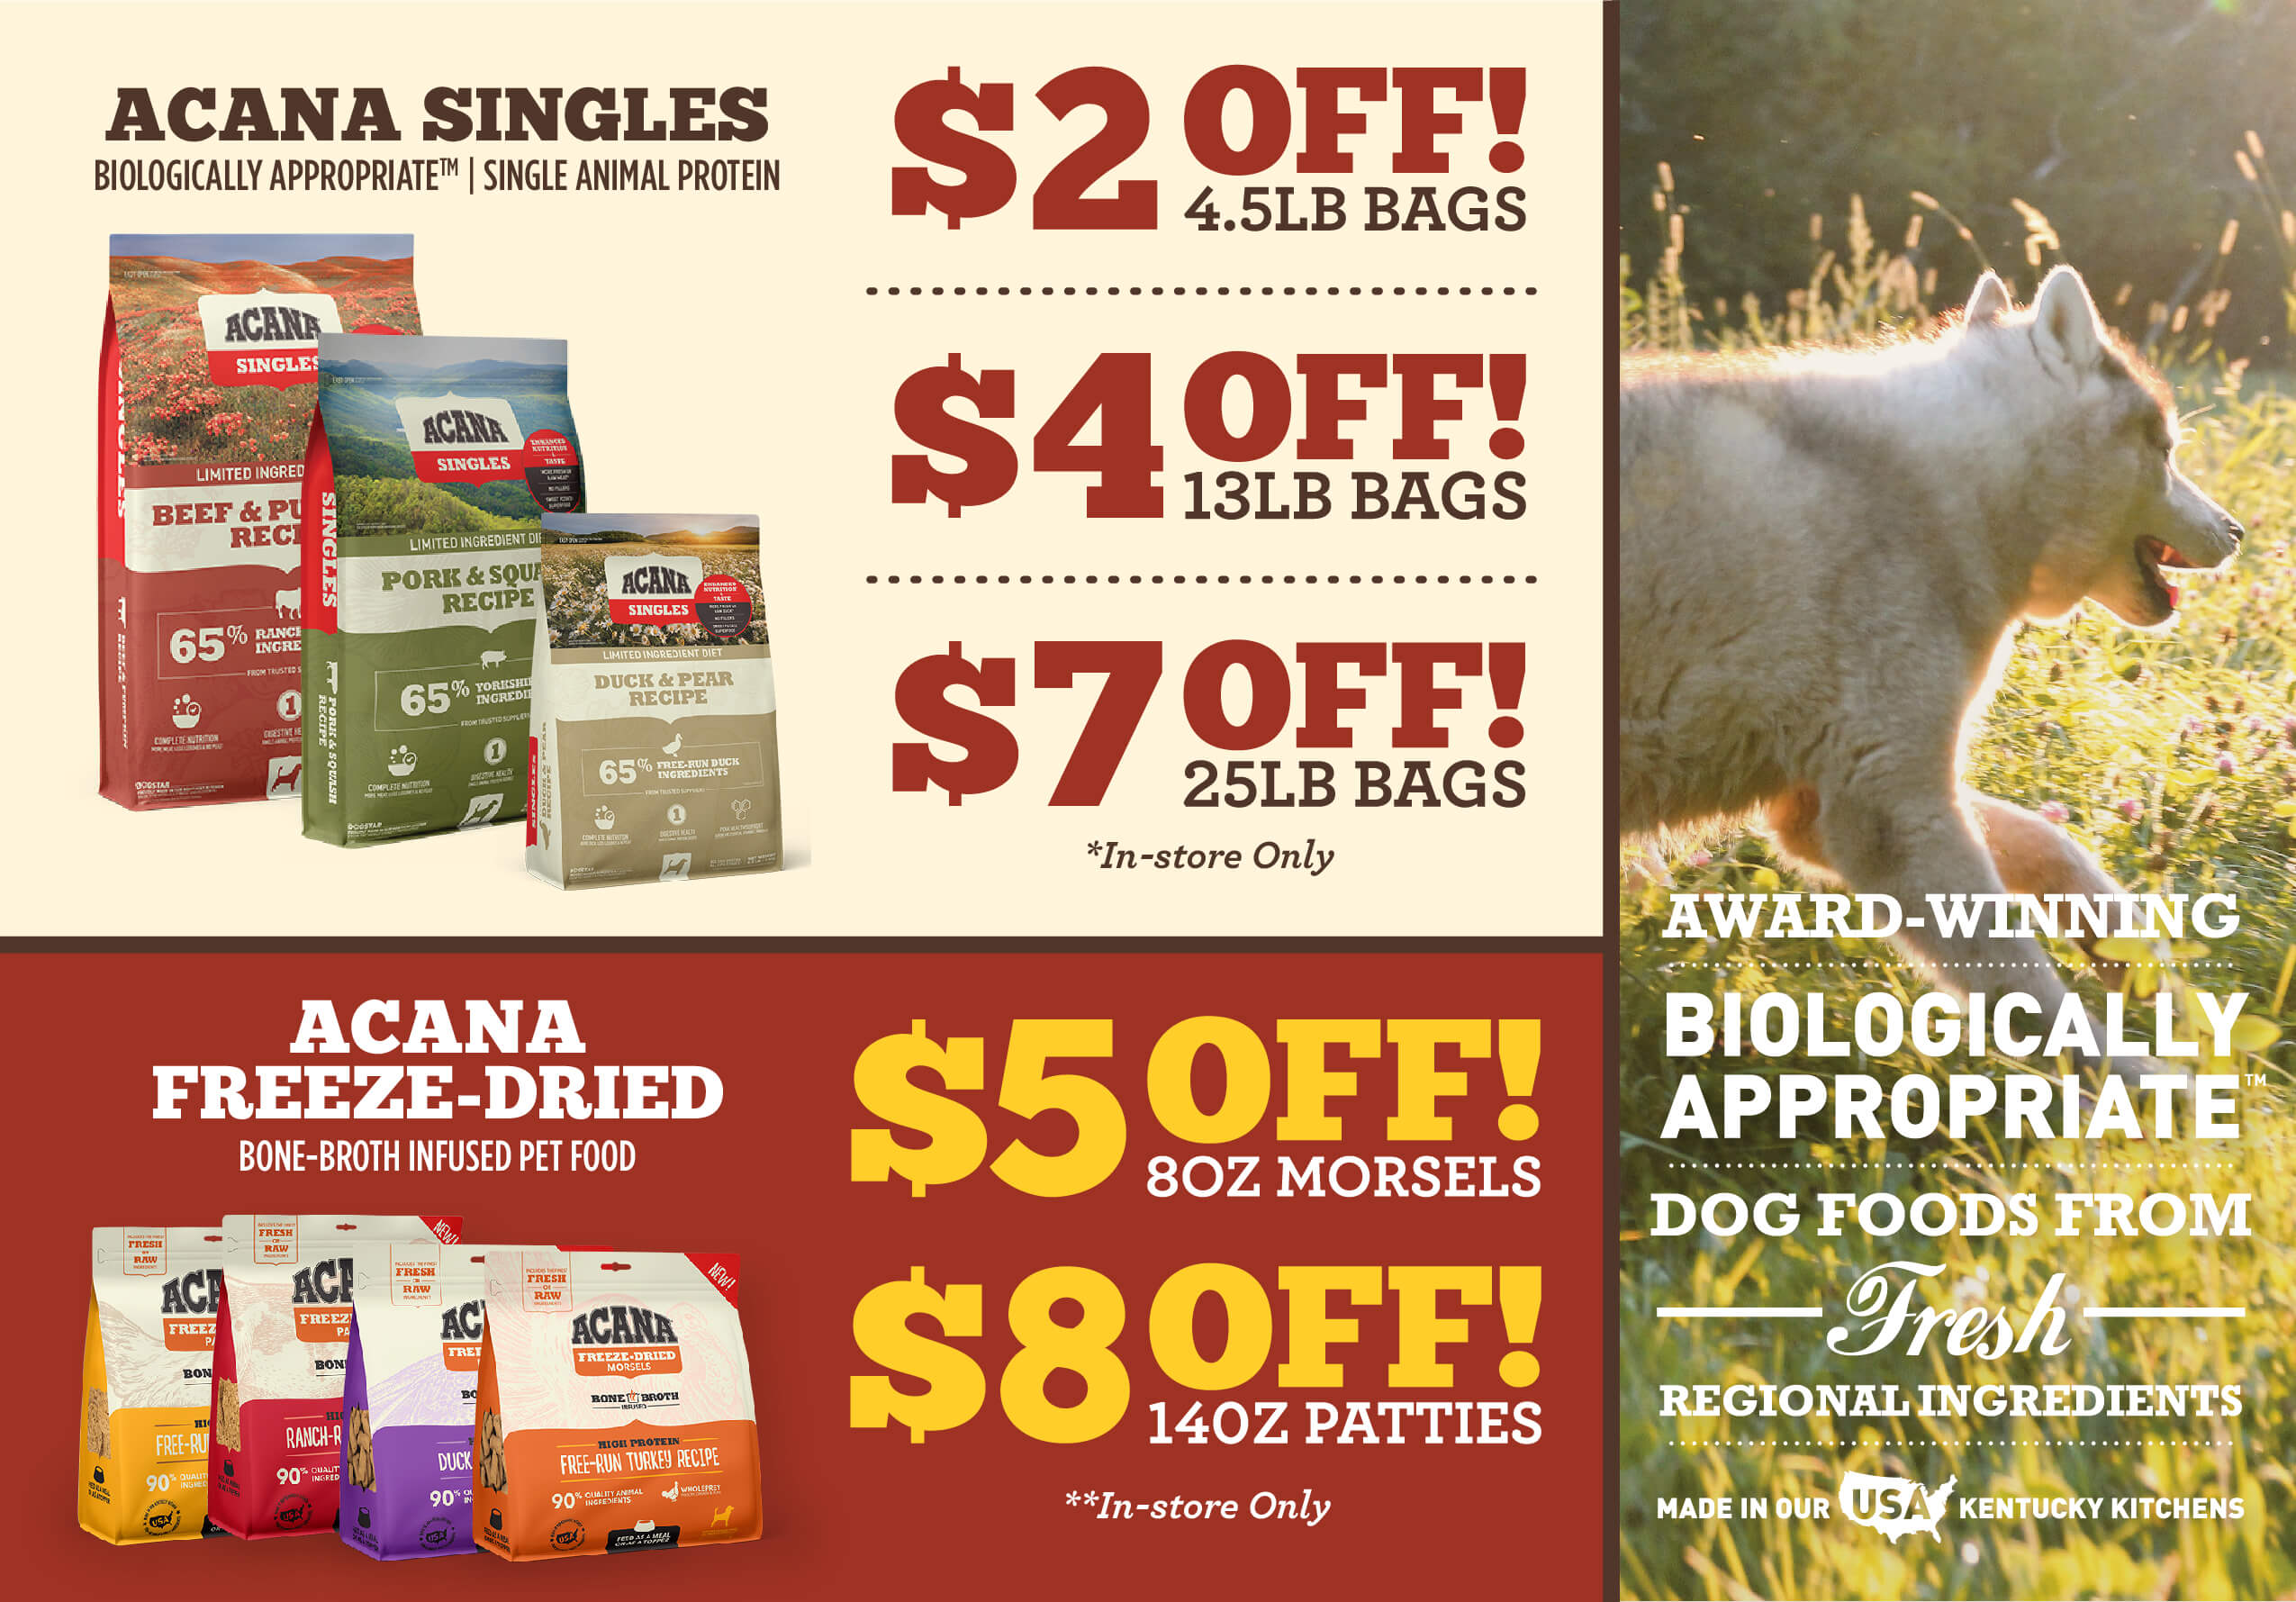 ACANA Freeze-Dried Bone-Broth Infused Pet Food $5 Off 8oz Morsels, $8 Off 14oz Patties and ACANA Singles Dry Dog Food - $2 Off 4.5lb Bags, $4 Off 13lb Bags, $7 Off 25lb Bags